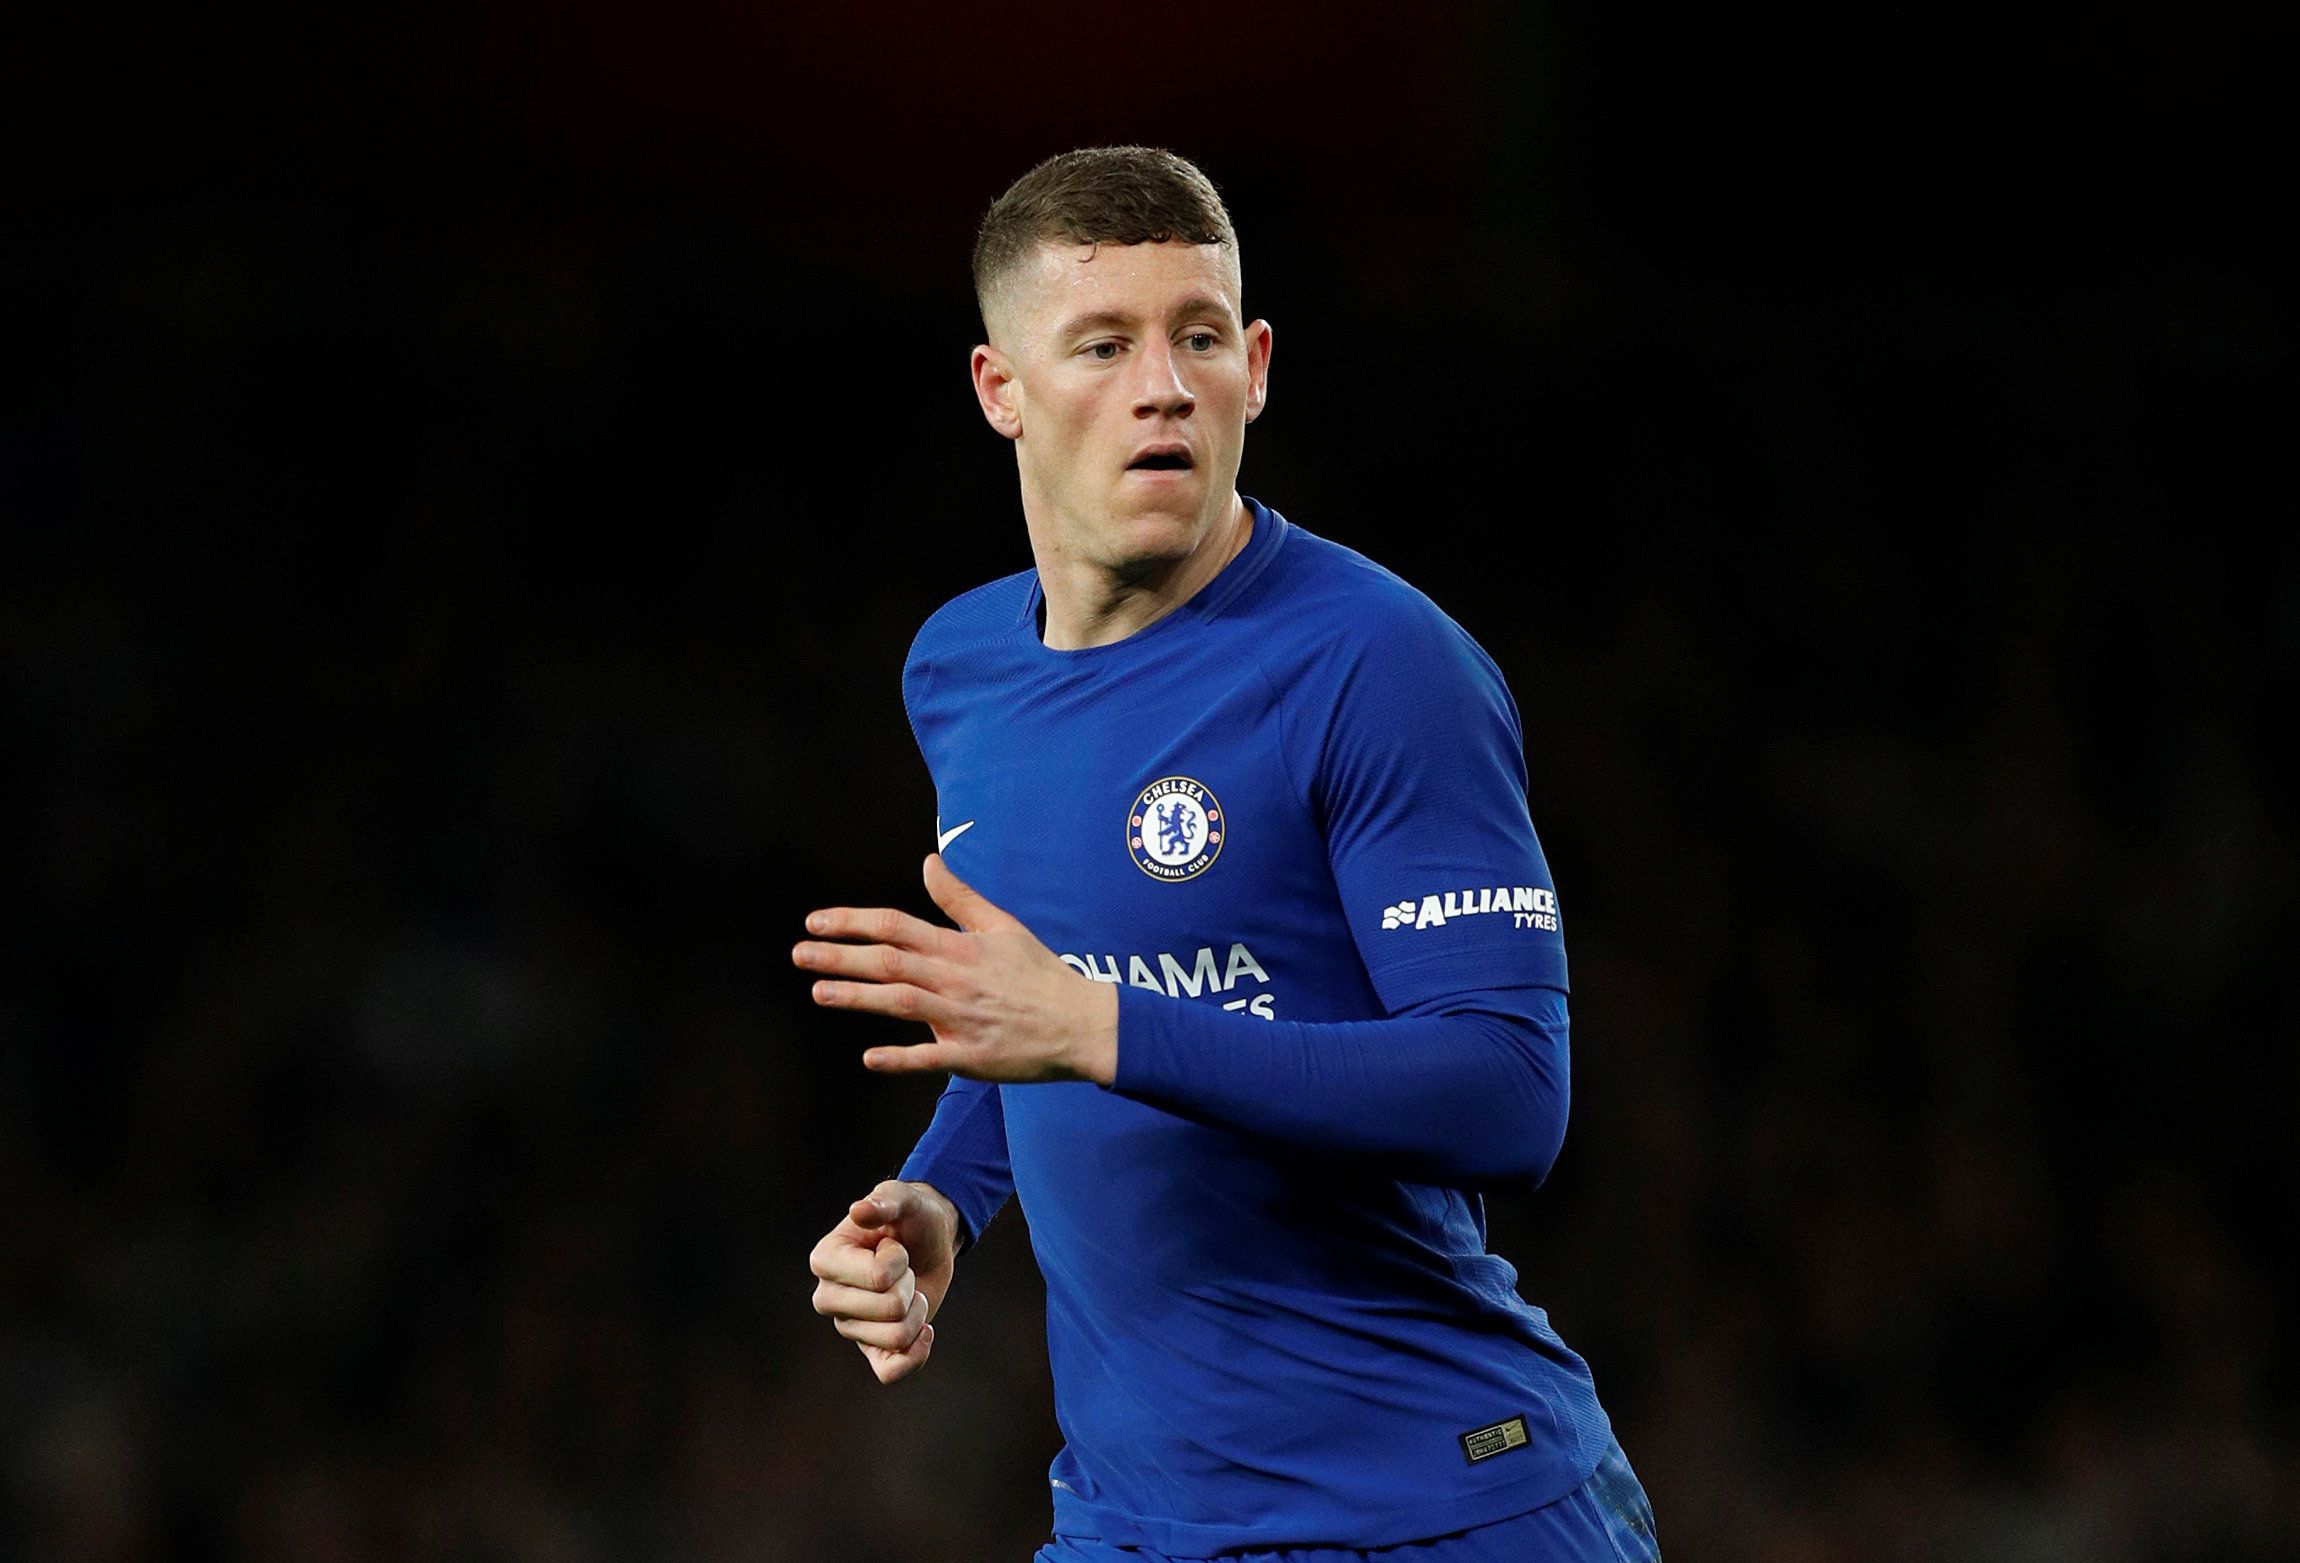 Soccer Football - Carabao Cup Semi Final Second Leg - Arsenal vs Chelsea - Emirates Stadium, London, Britain - January 24, 2018   Chelsea’s Ross Barkley    Action Images via Reuters/John Sibley    EDITORIAL USE ONLY. No use with unauthorized audio, video, data, fixture lists, club/league logos or 